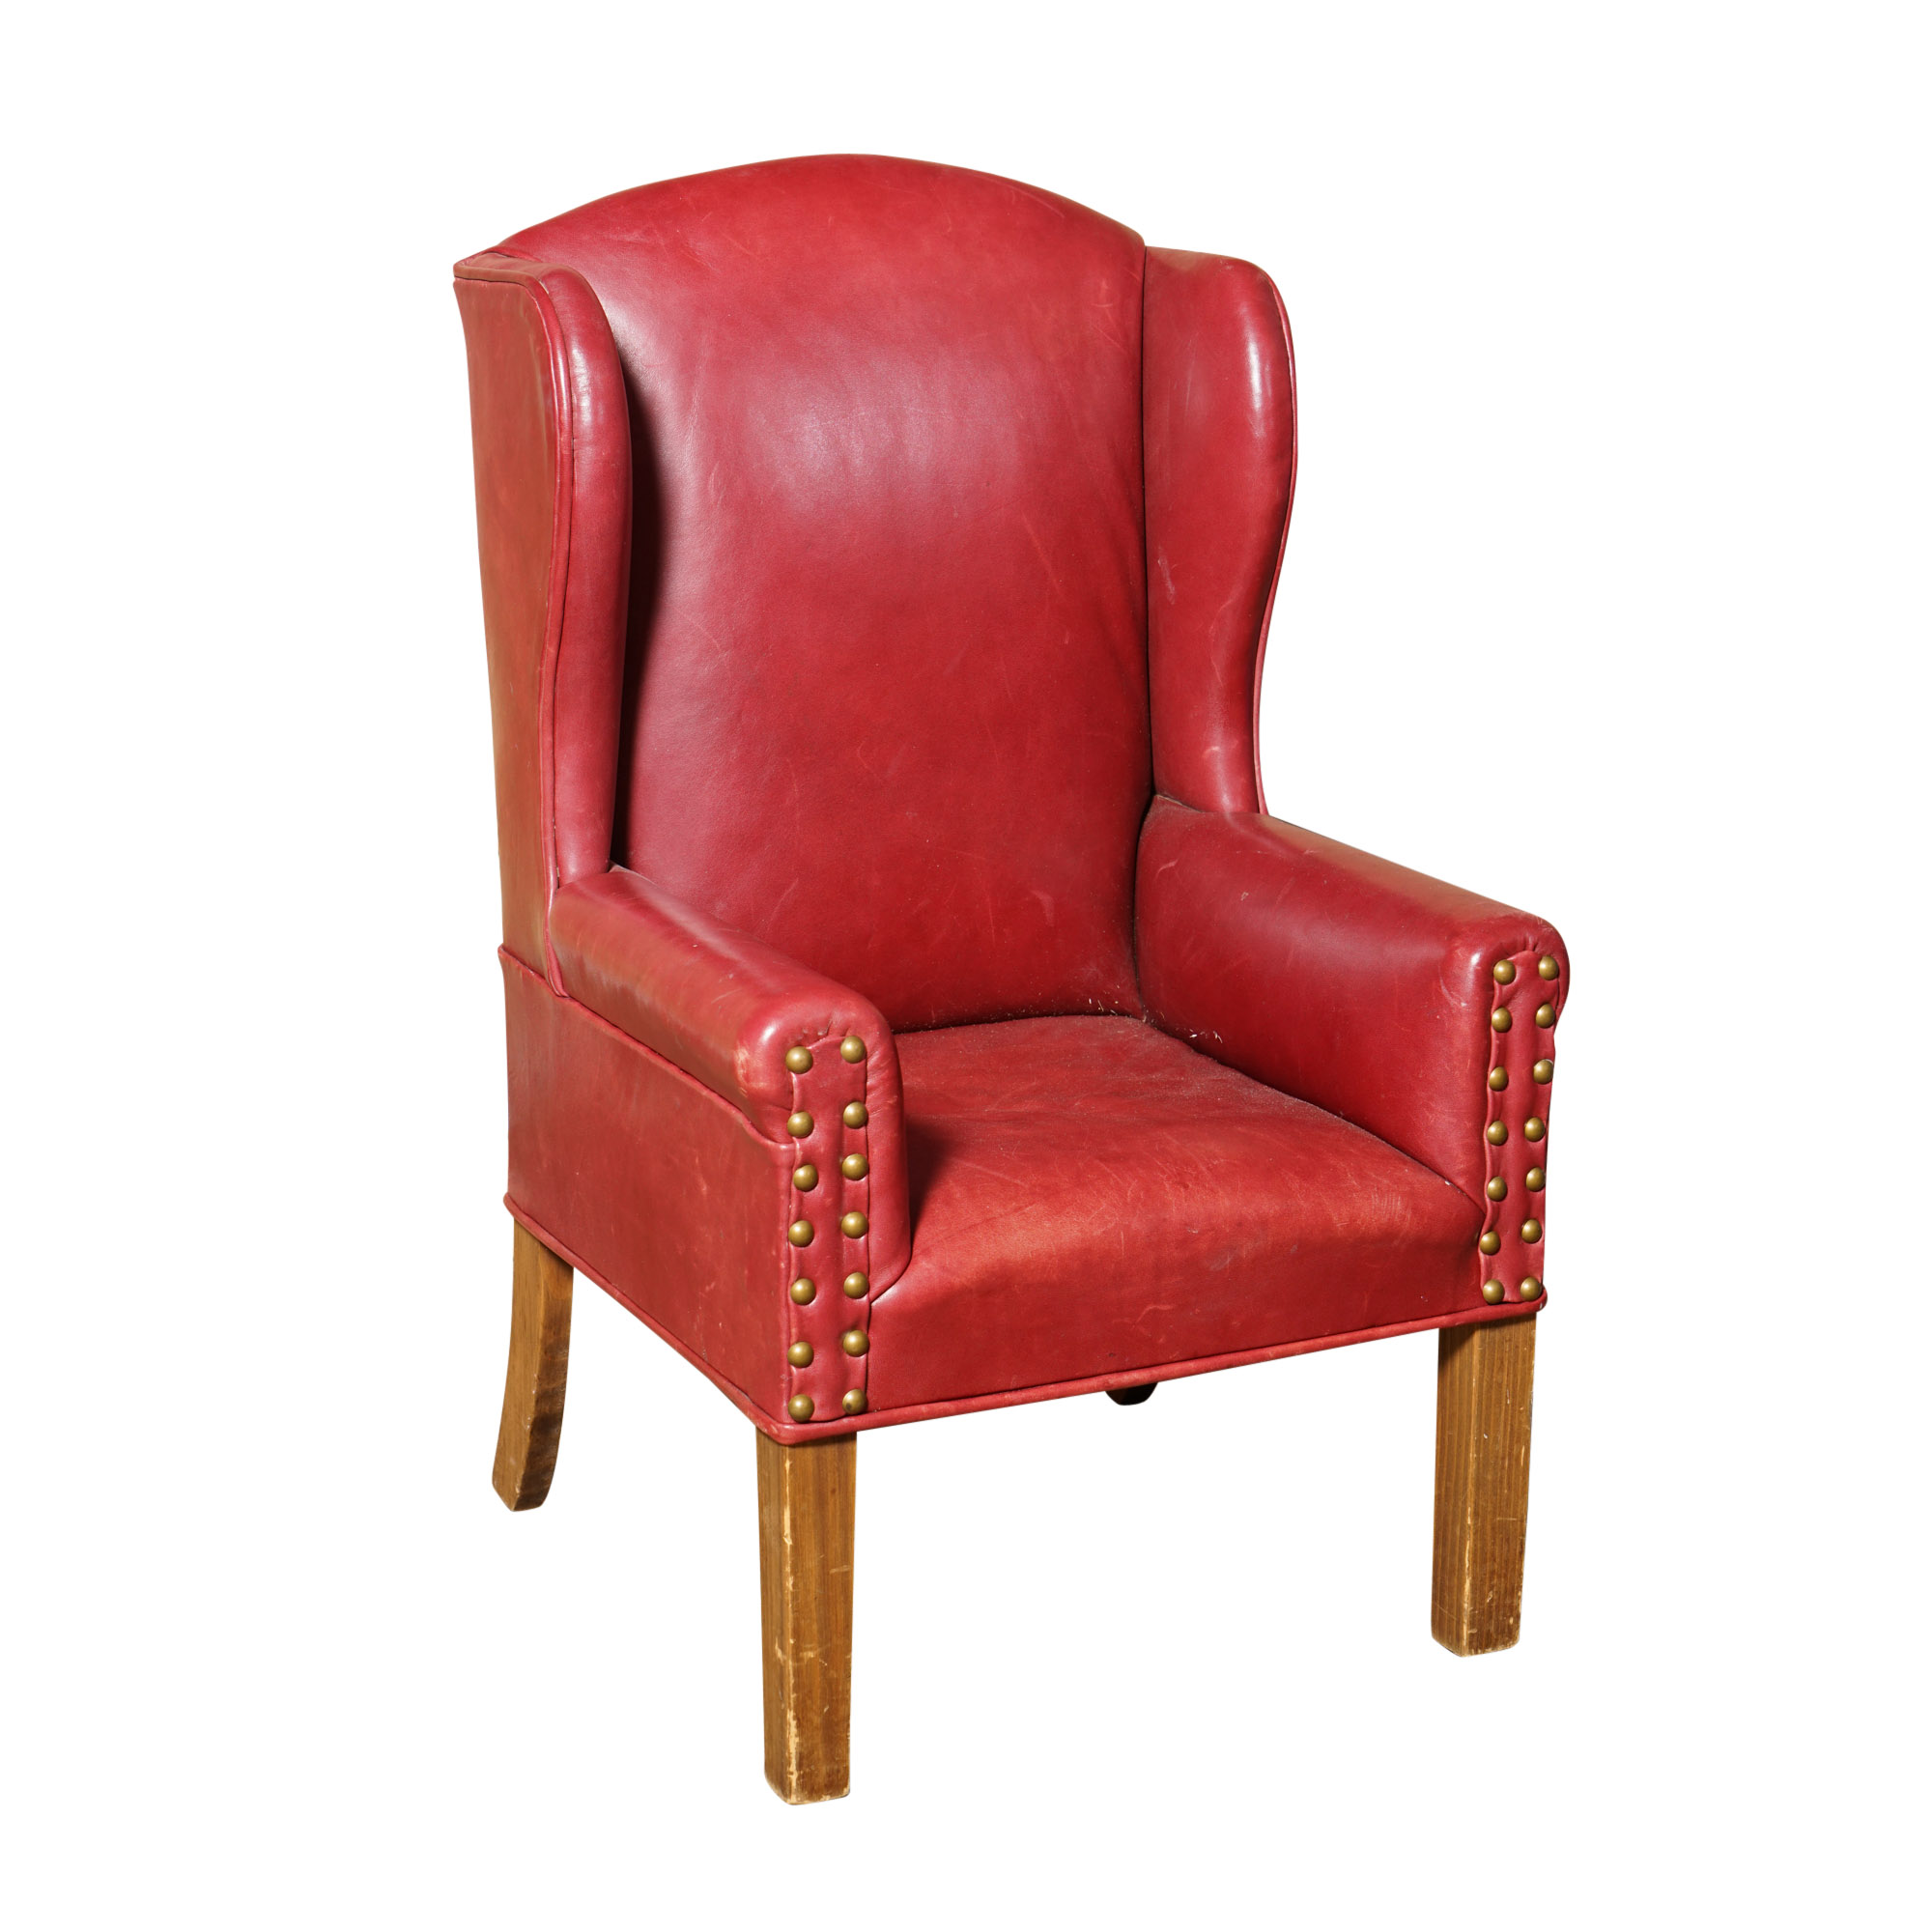 children's wingback chair